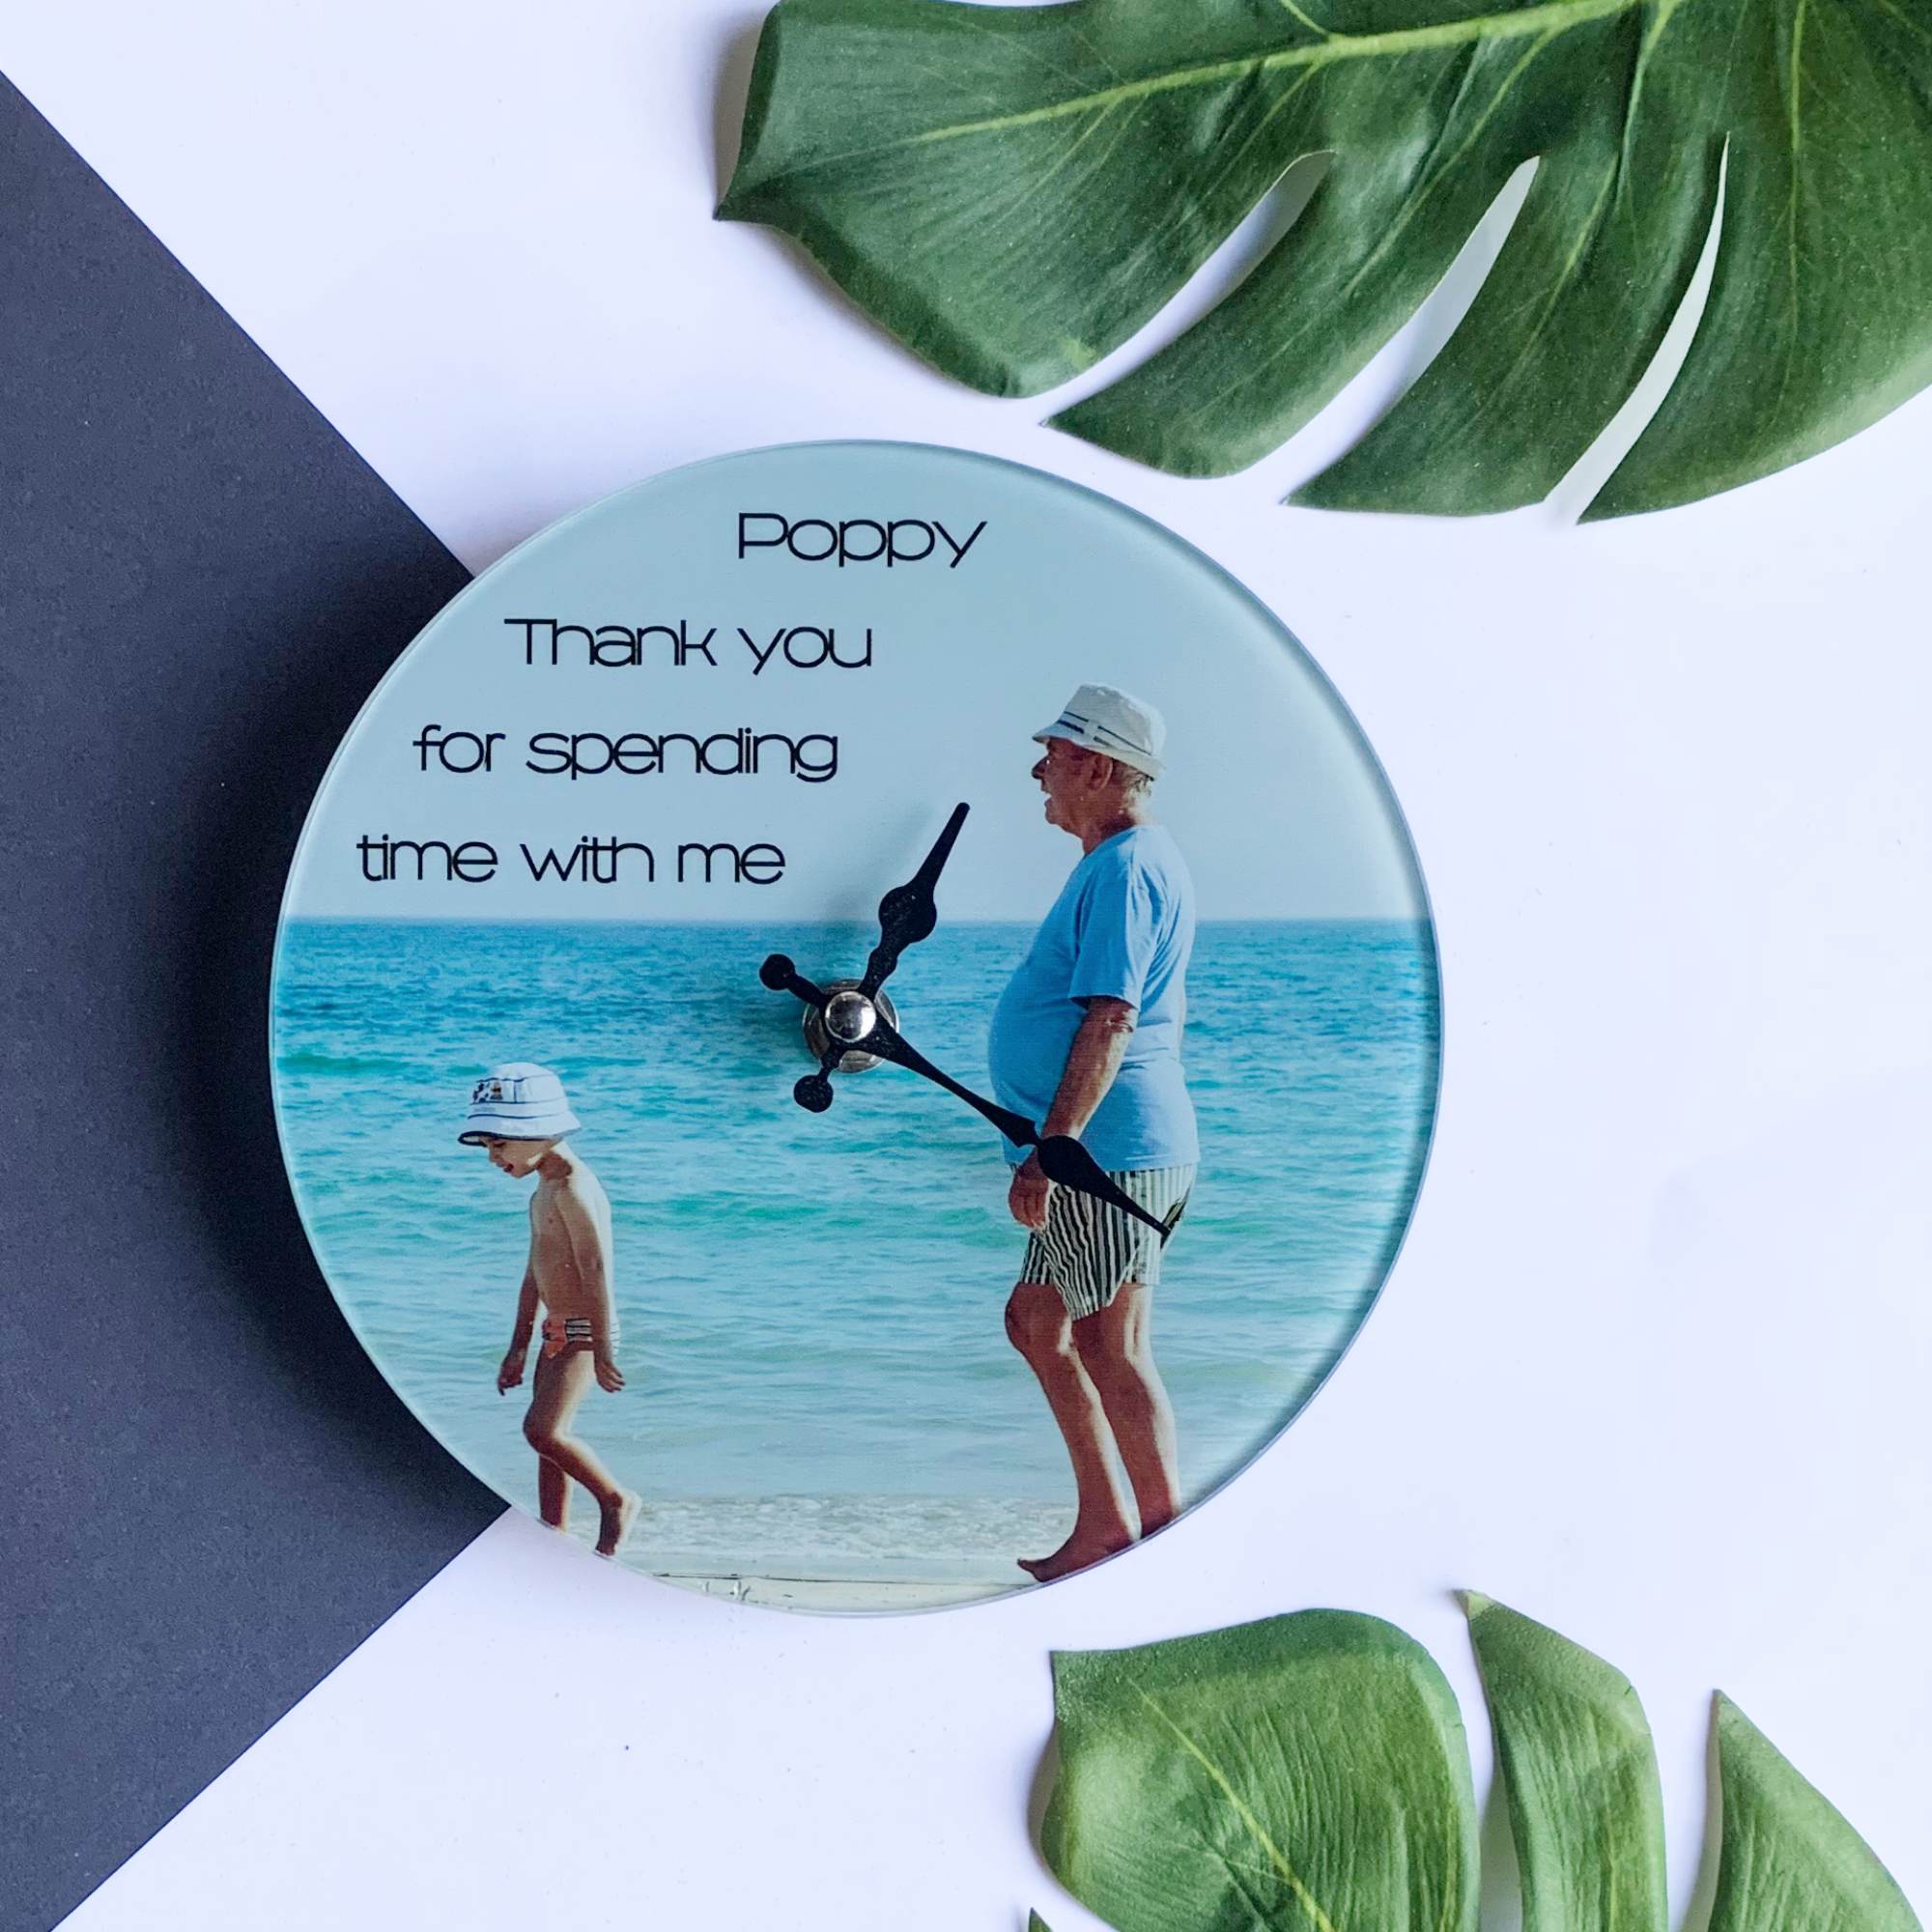 personalised gifts | Stay at Home Mum.com.au